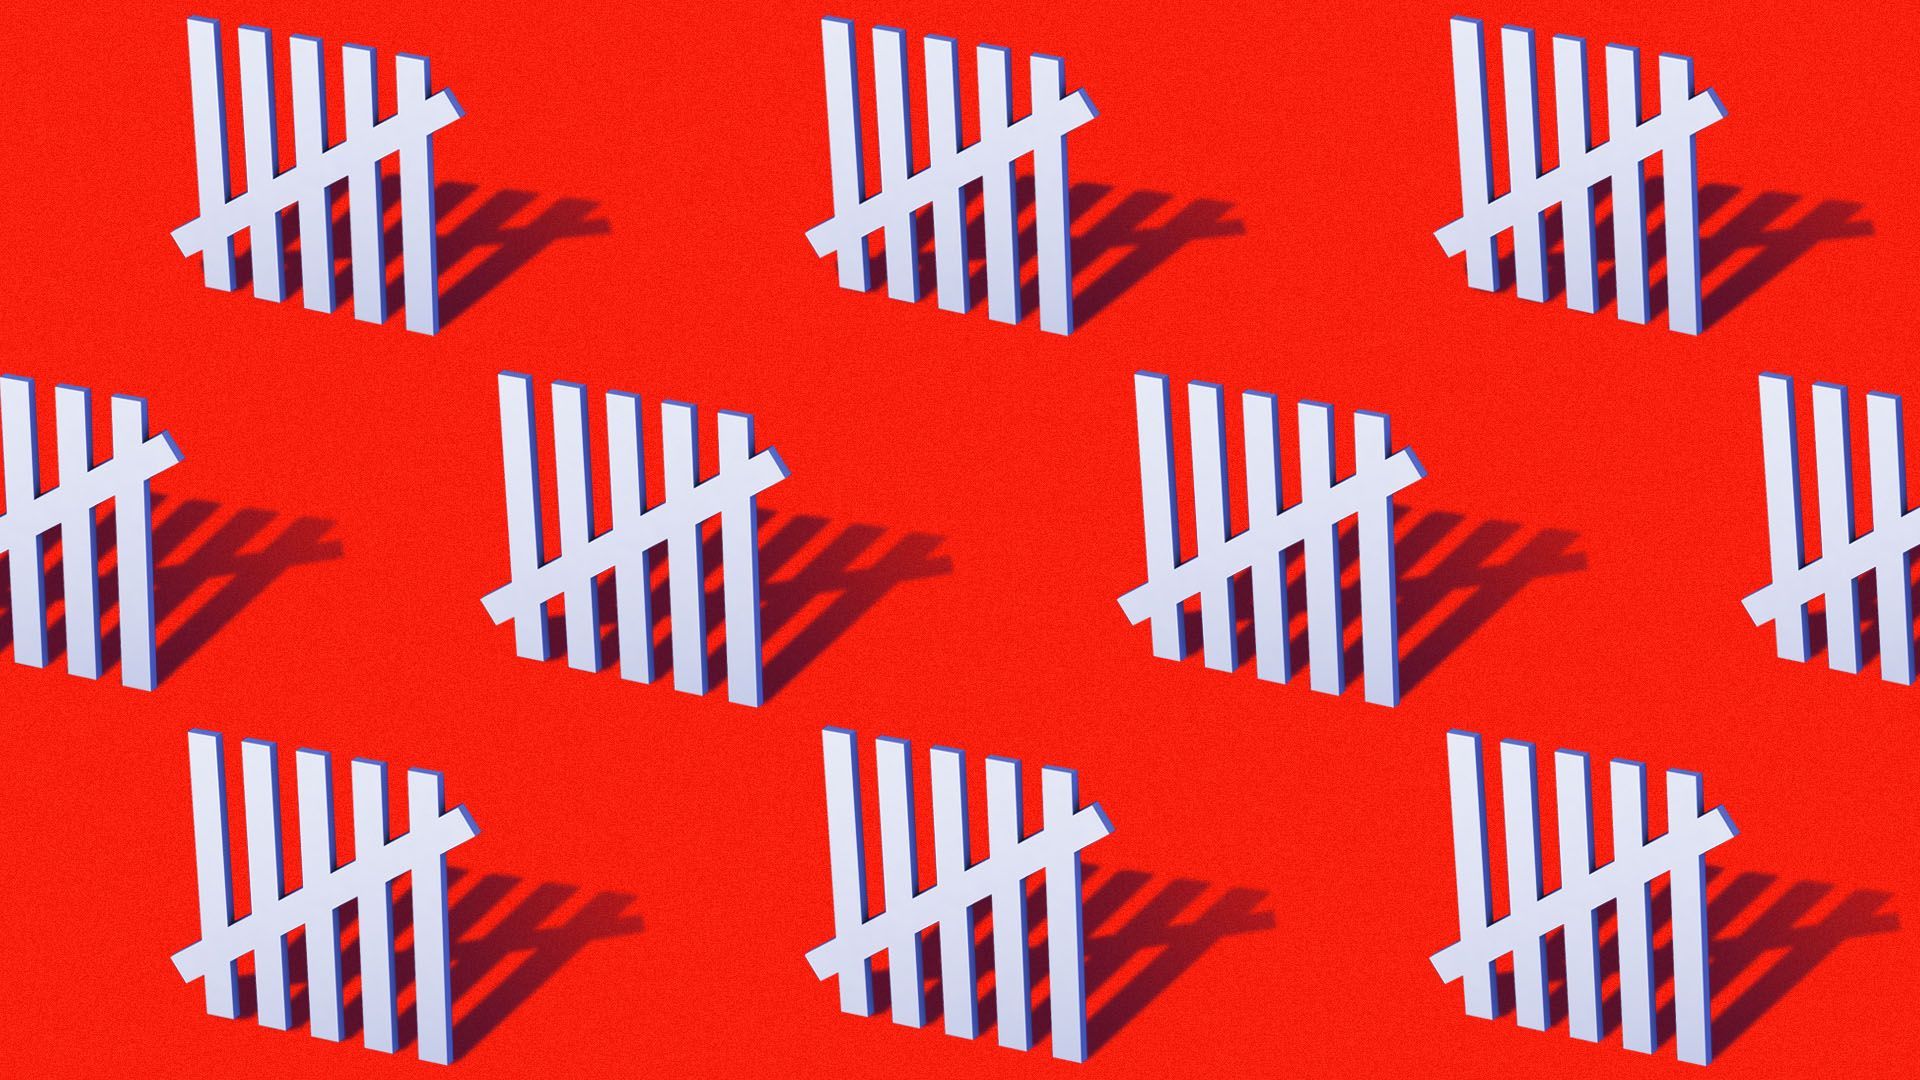 Illustration of rows of tally marks